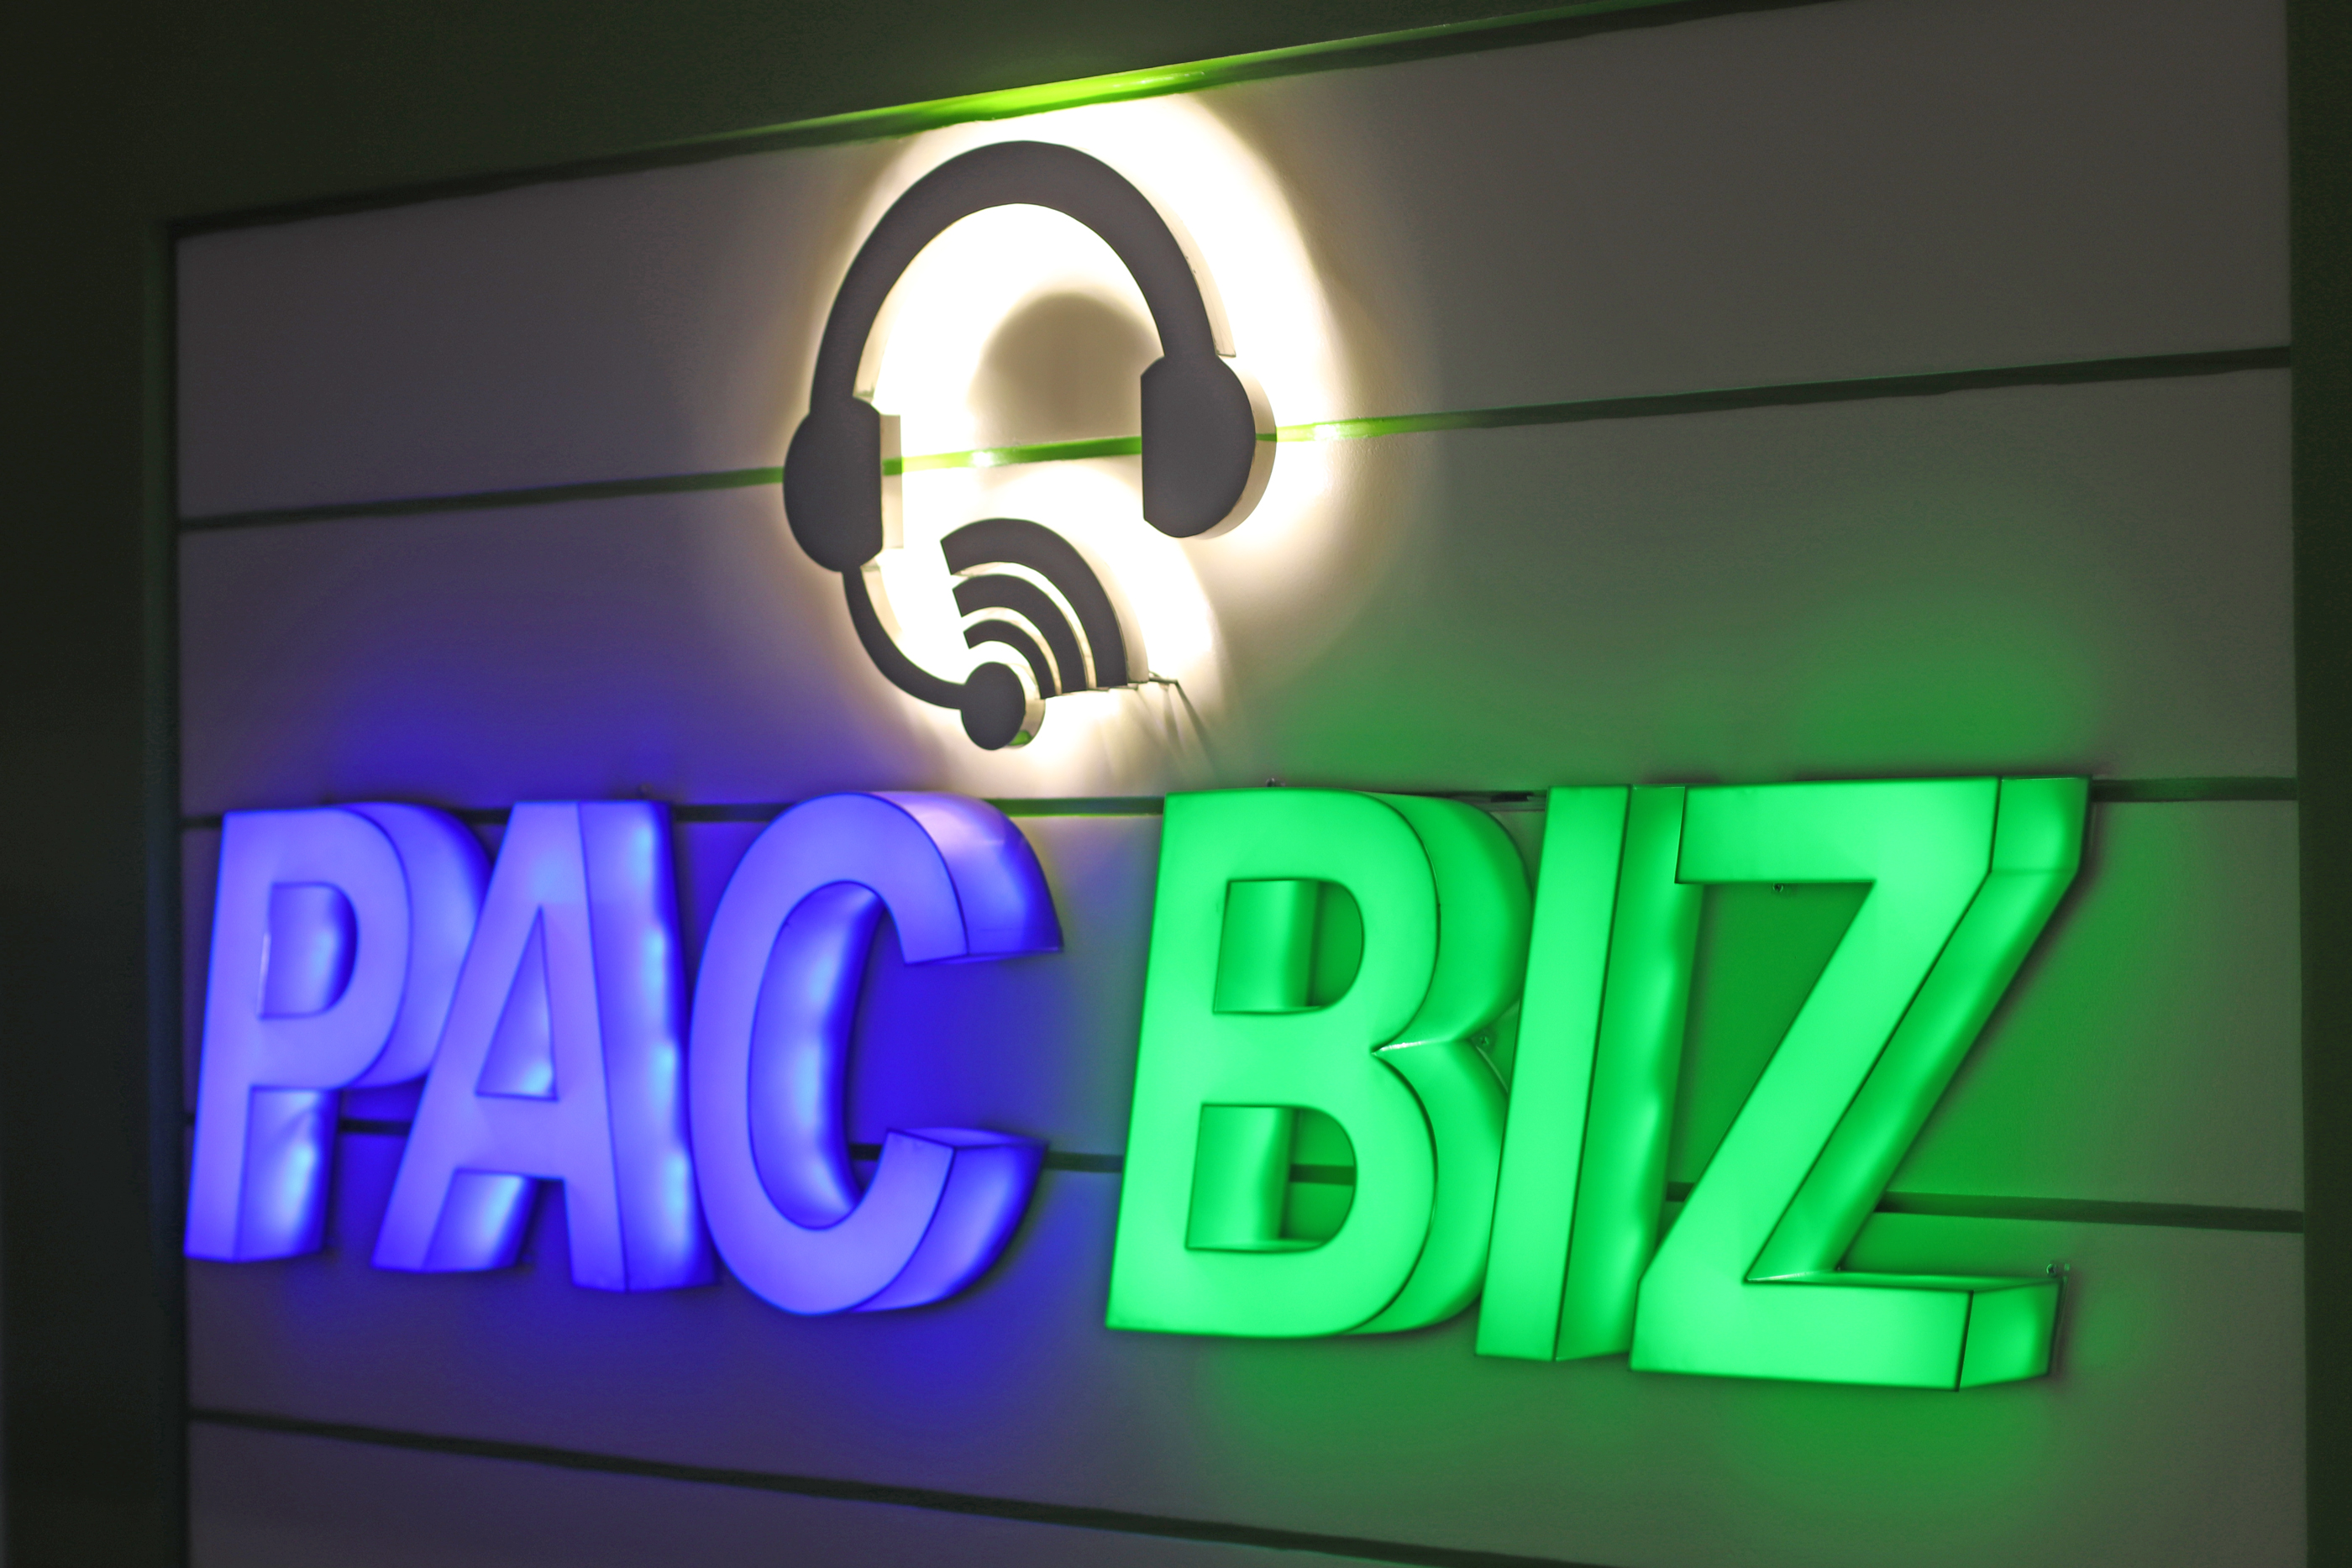 Pac Biz's illuminated logo greets visitors when they come into the receiving area of the new Pac Biz office